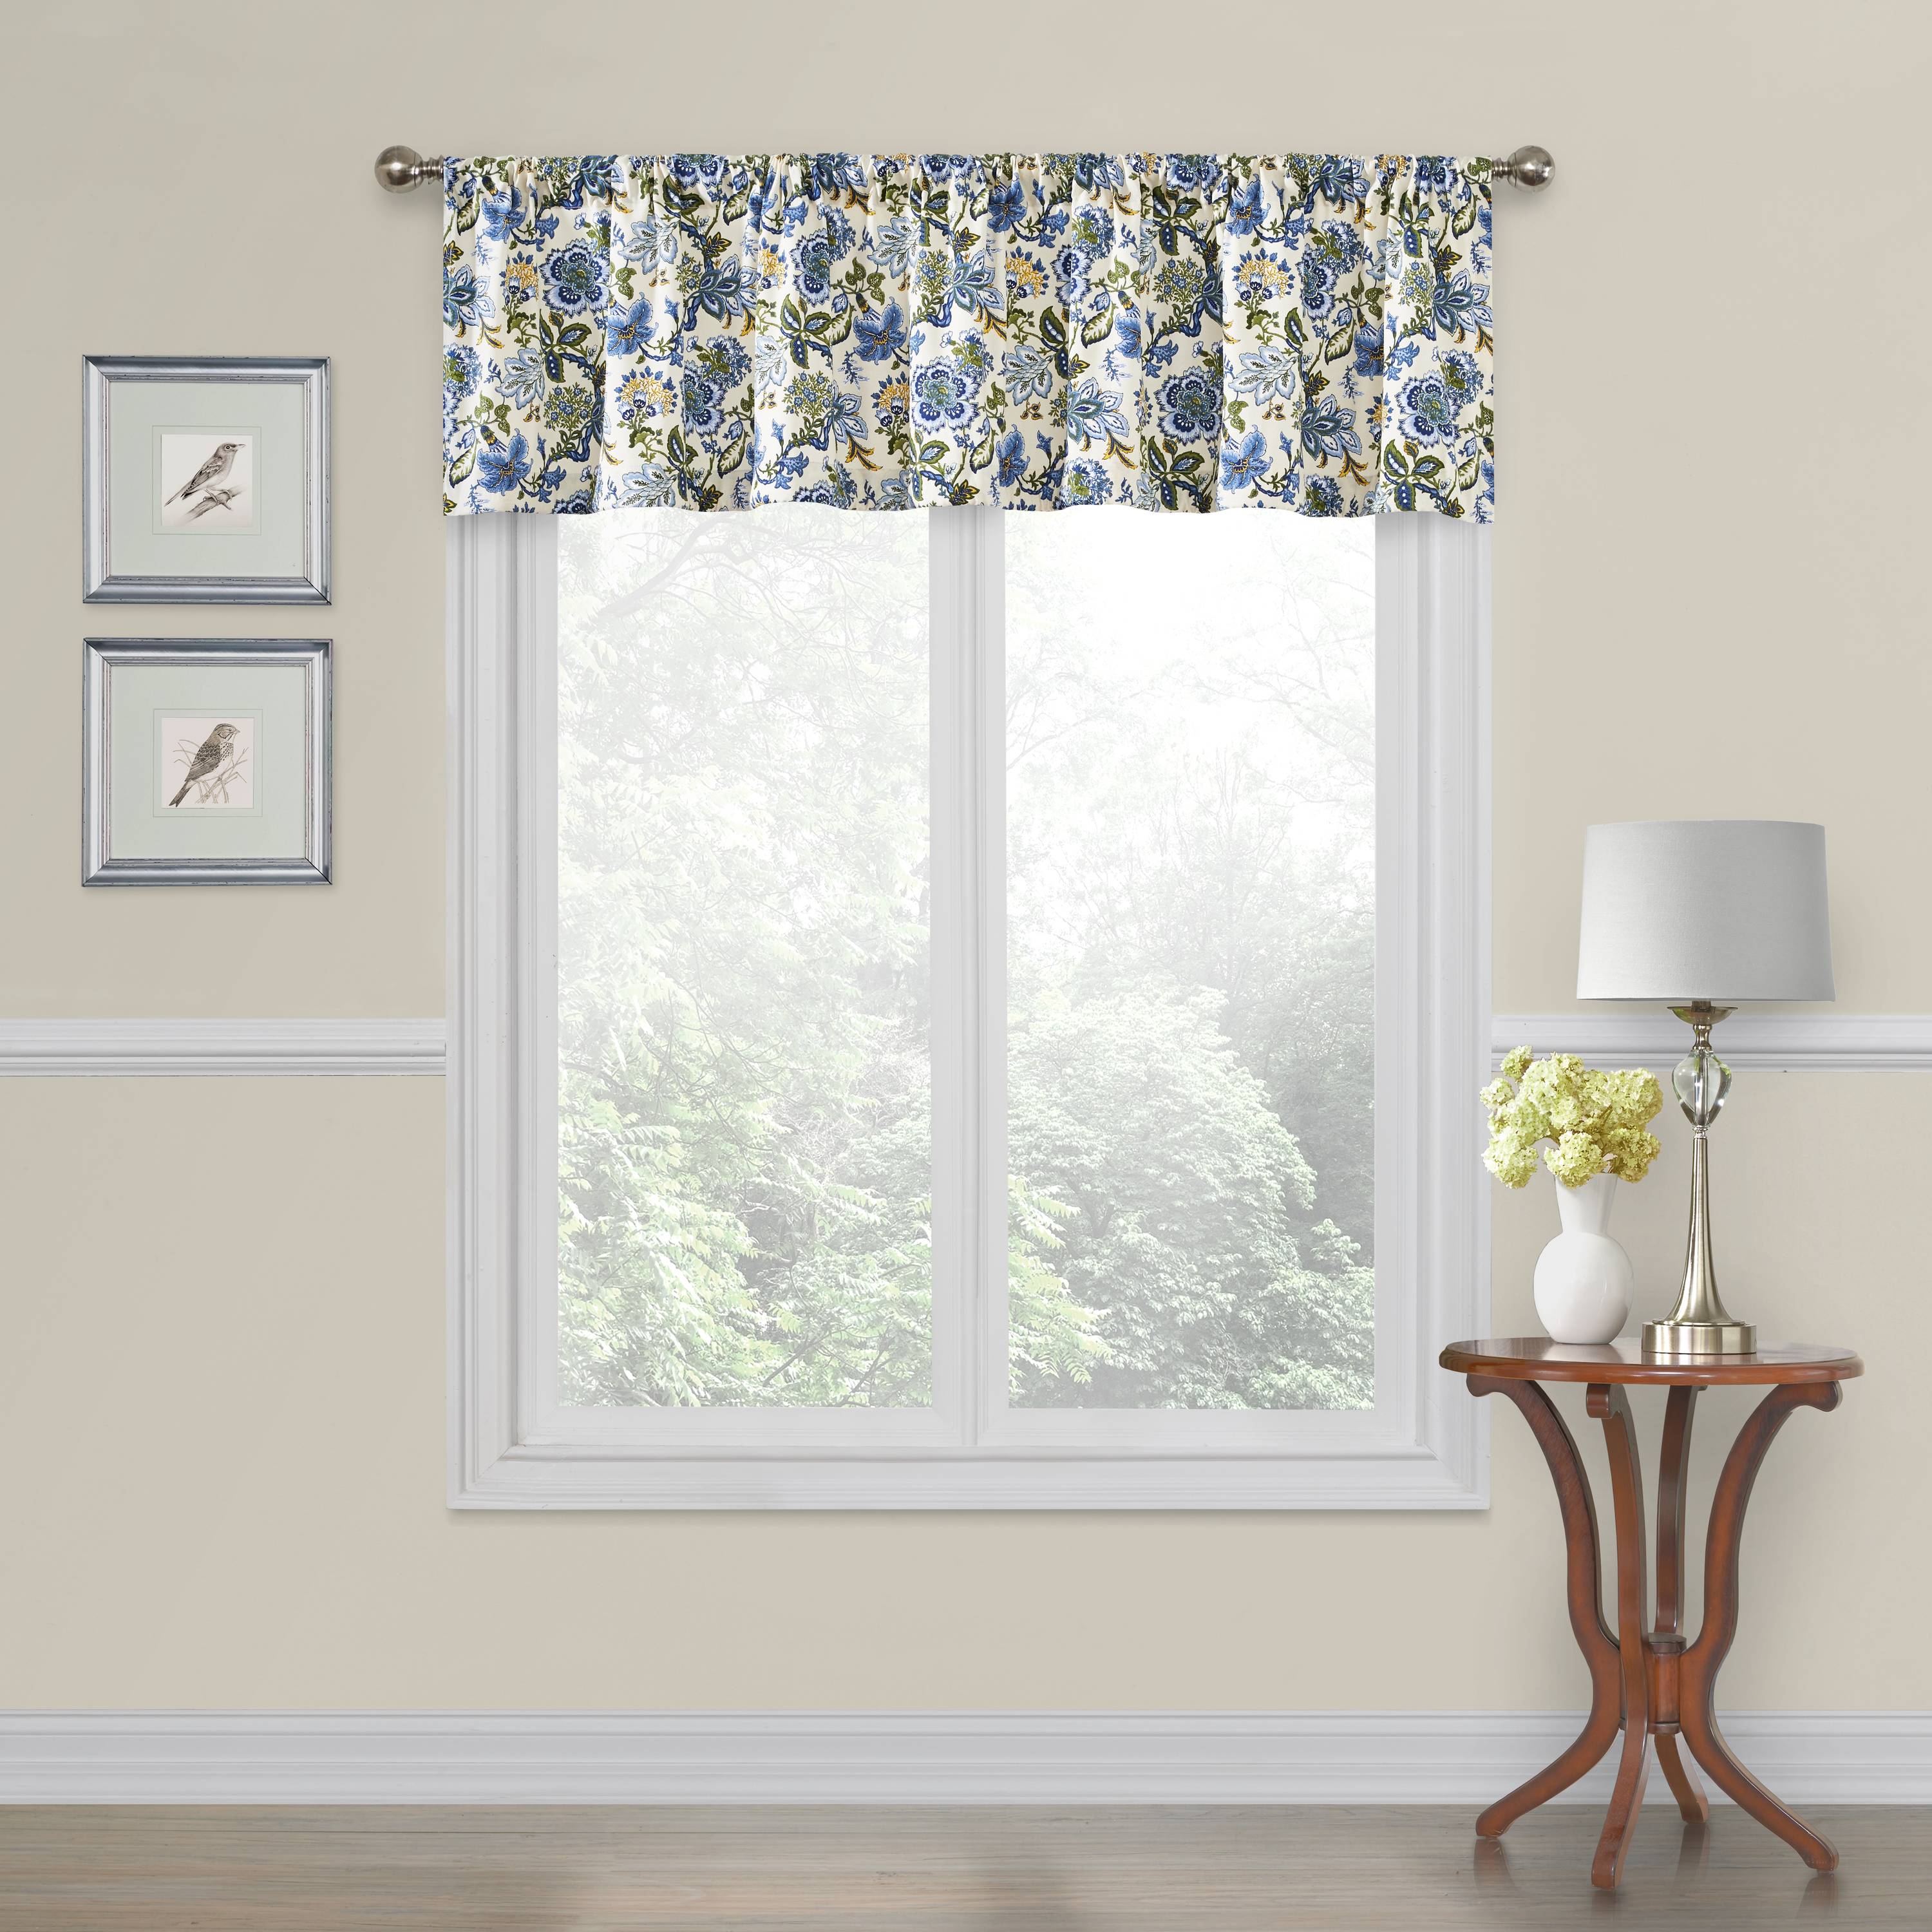 What Is the Standard Size of a Window Valance?